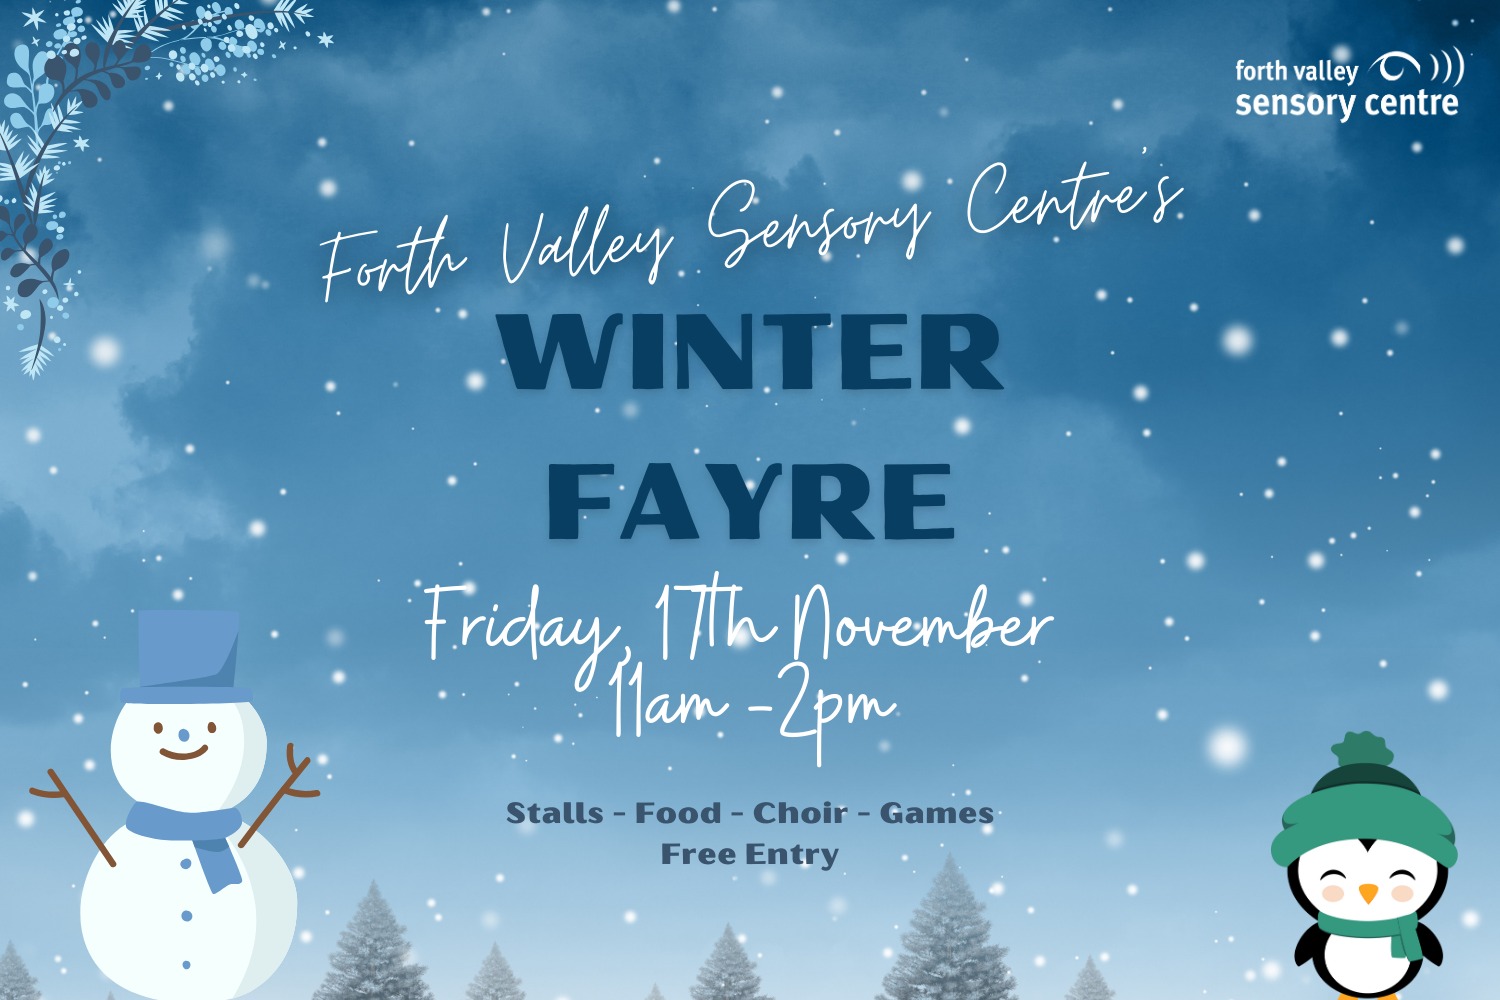 Winter scene with snow and fir trees in the background and a snowman and penguin in the bottom right and left hand corner. Text says Forth Valley Sensory Centre Winter Fayre, Friday 17th November, 11am - 2pm. Stalls - Food - Choir - Games. Free Entry. 